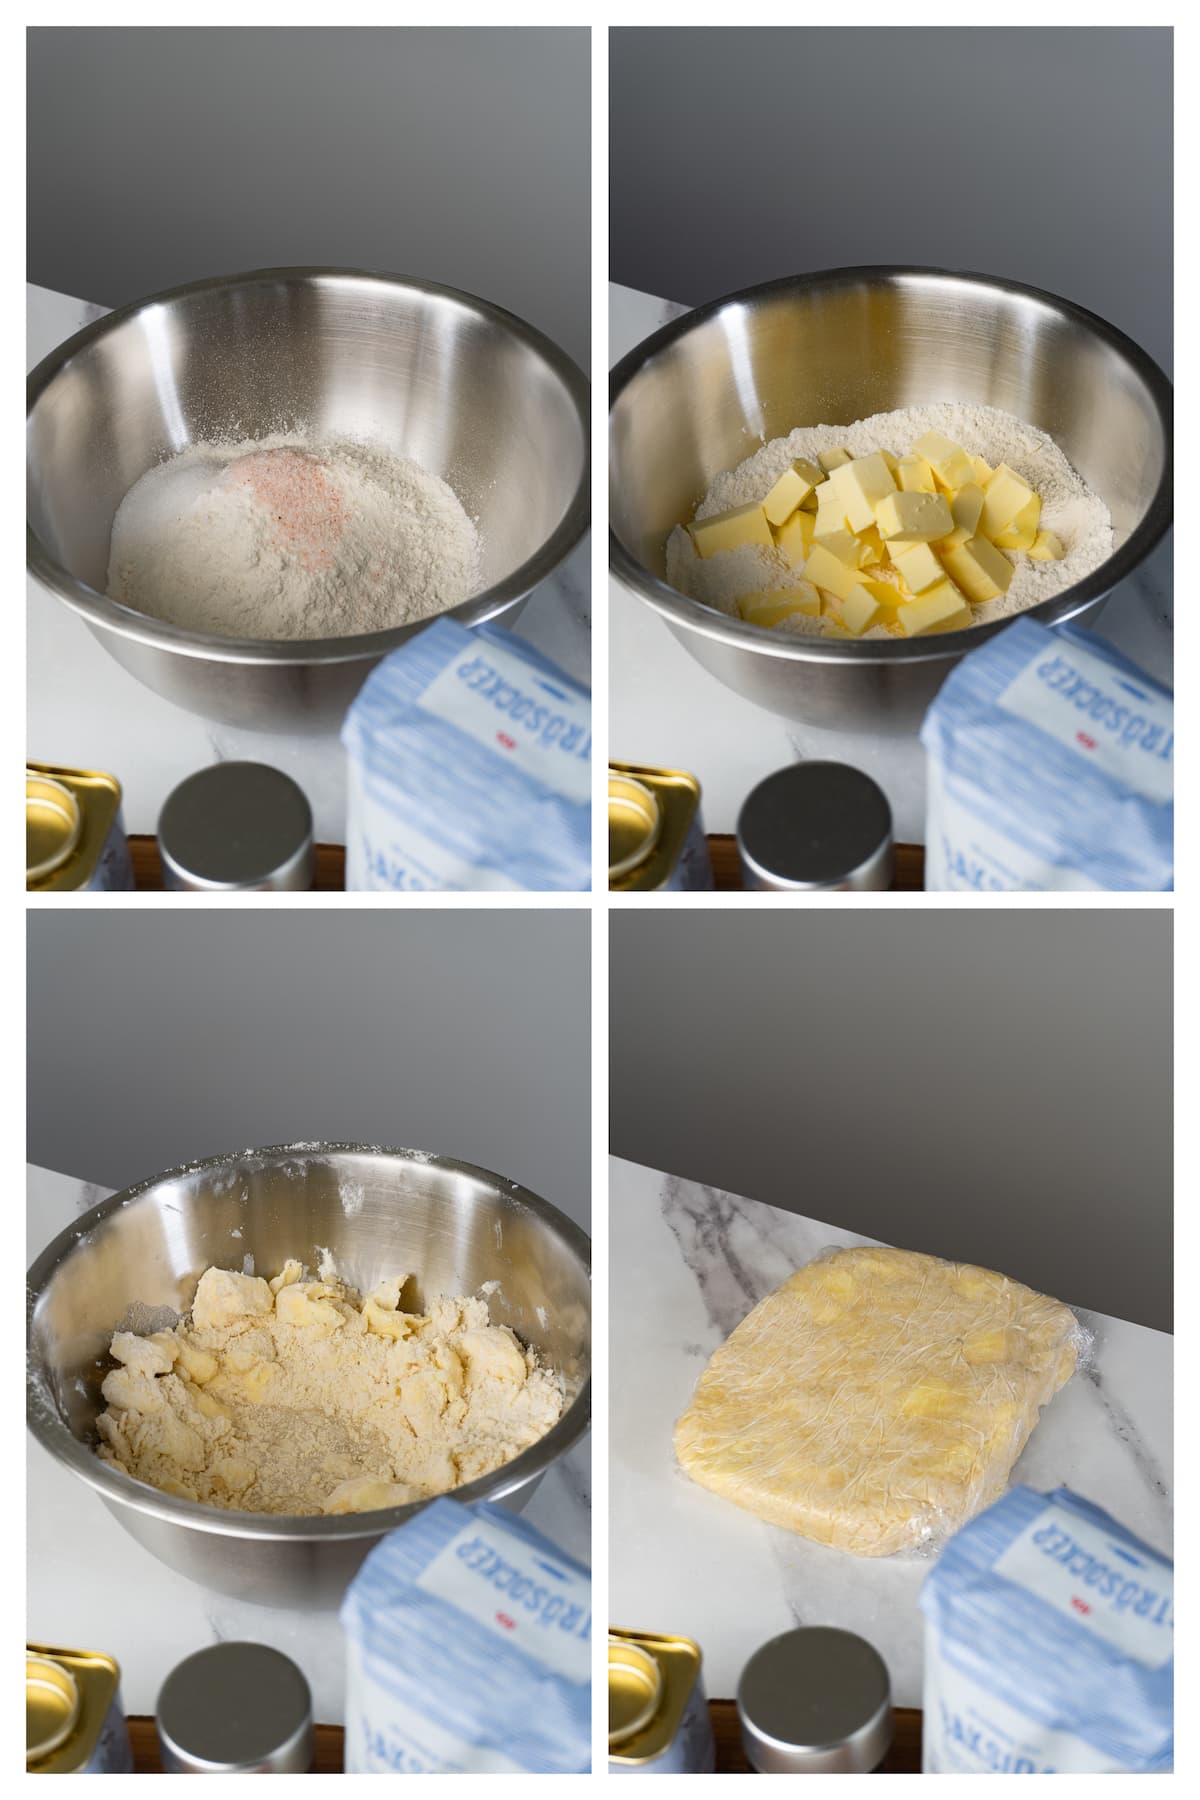 A collage image shows how to make initial dough for rough puff pastry in four steps before lamination.